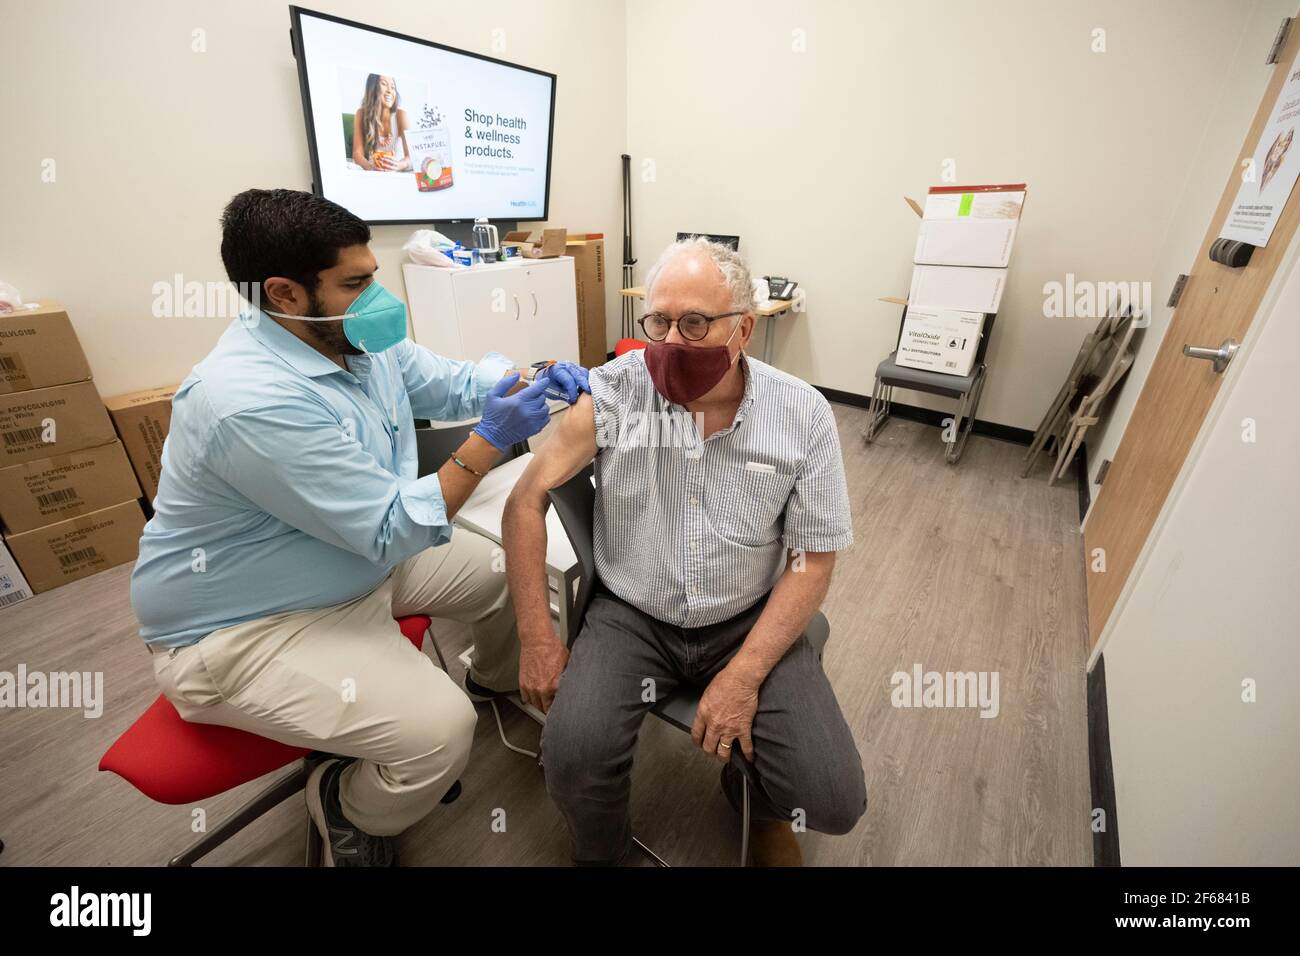 Austin, Texas March 30, 2021:  BOB DAEMMRICH (r), 66, gets his second shot of Pfizer's coronavirus vaccine at a local pharmacy, three weeks after the first in the same location. Texas is reporting larger shipments of vaccinations and 1 in 6 eligible Texans are fully vaccinated, around 16%. Stock Photo